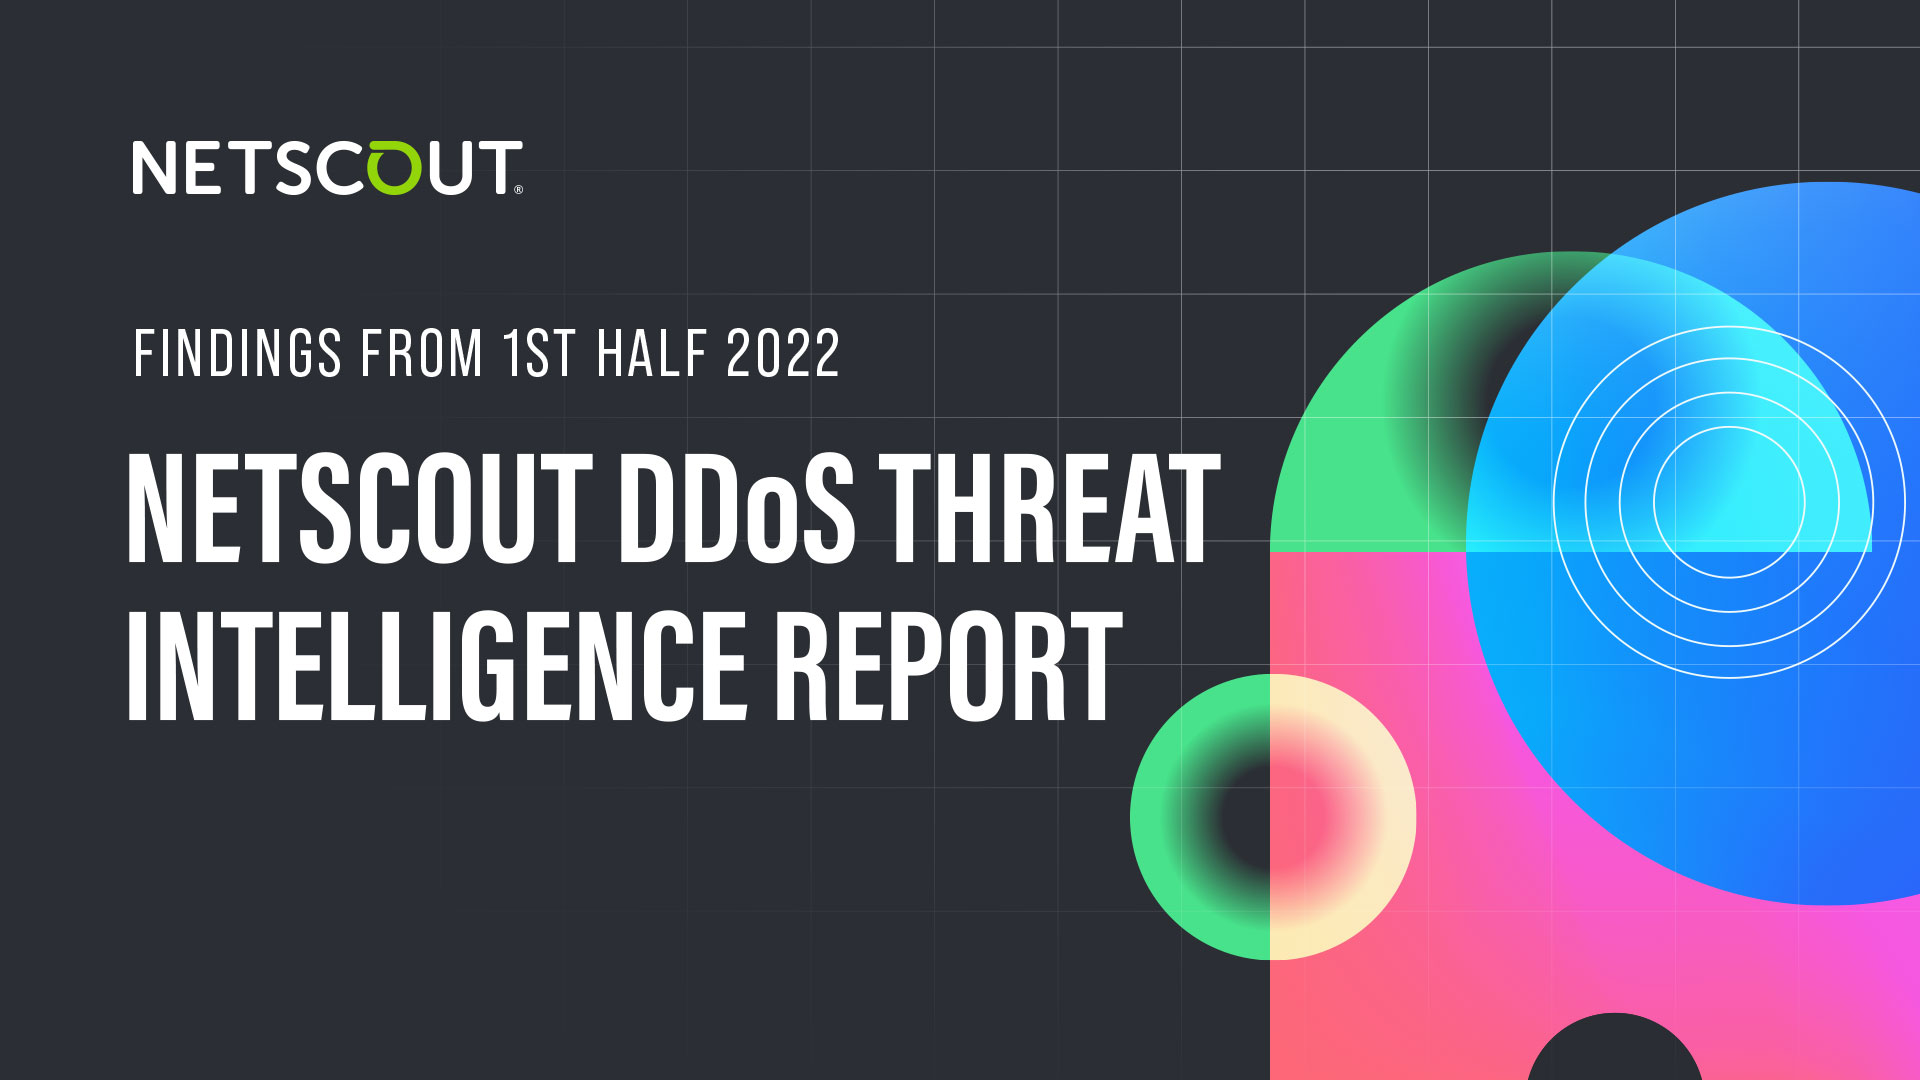 NETSCOUT DDoS Threat Intelligence Report 1H 2022